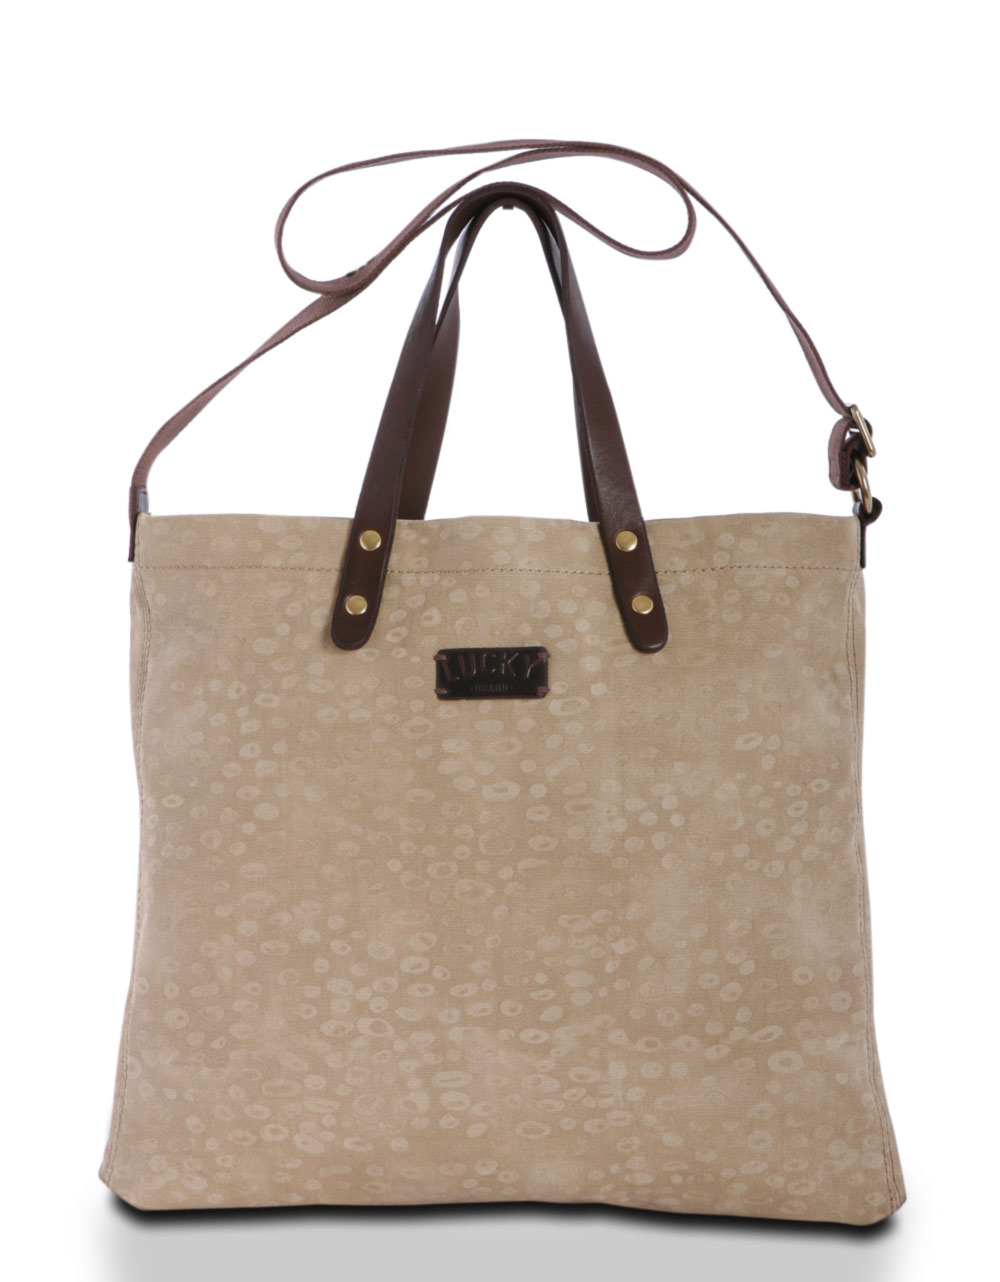 Lucky Brand Silverlake Canvas Convertible Tote Bag in Beige (leoprd mul) | Lyst